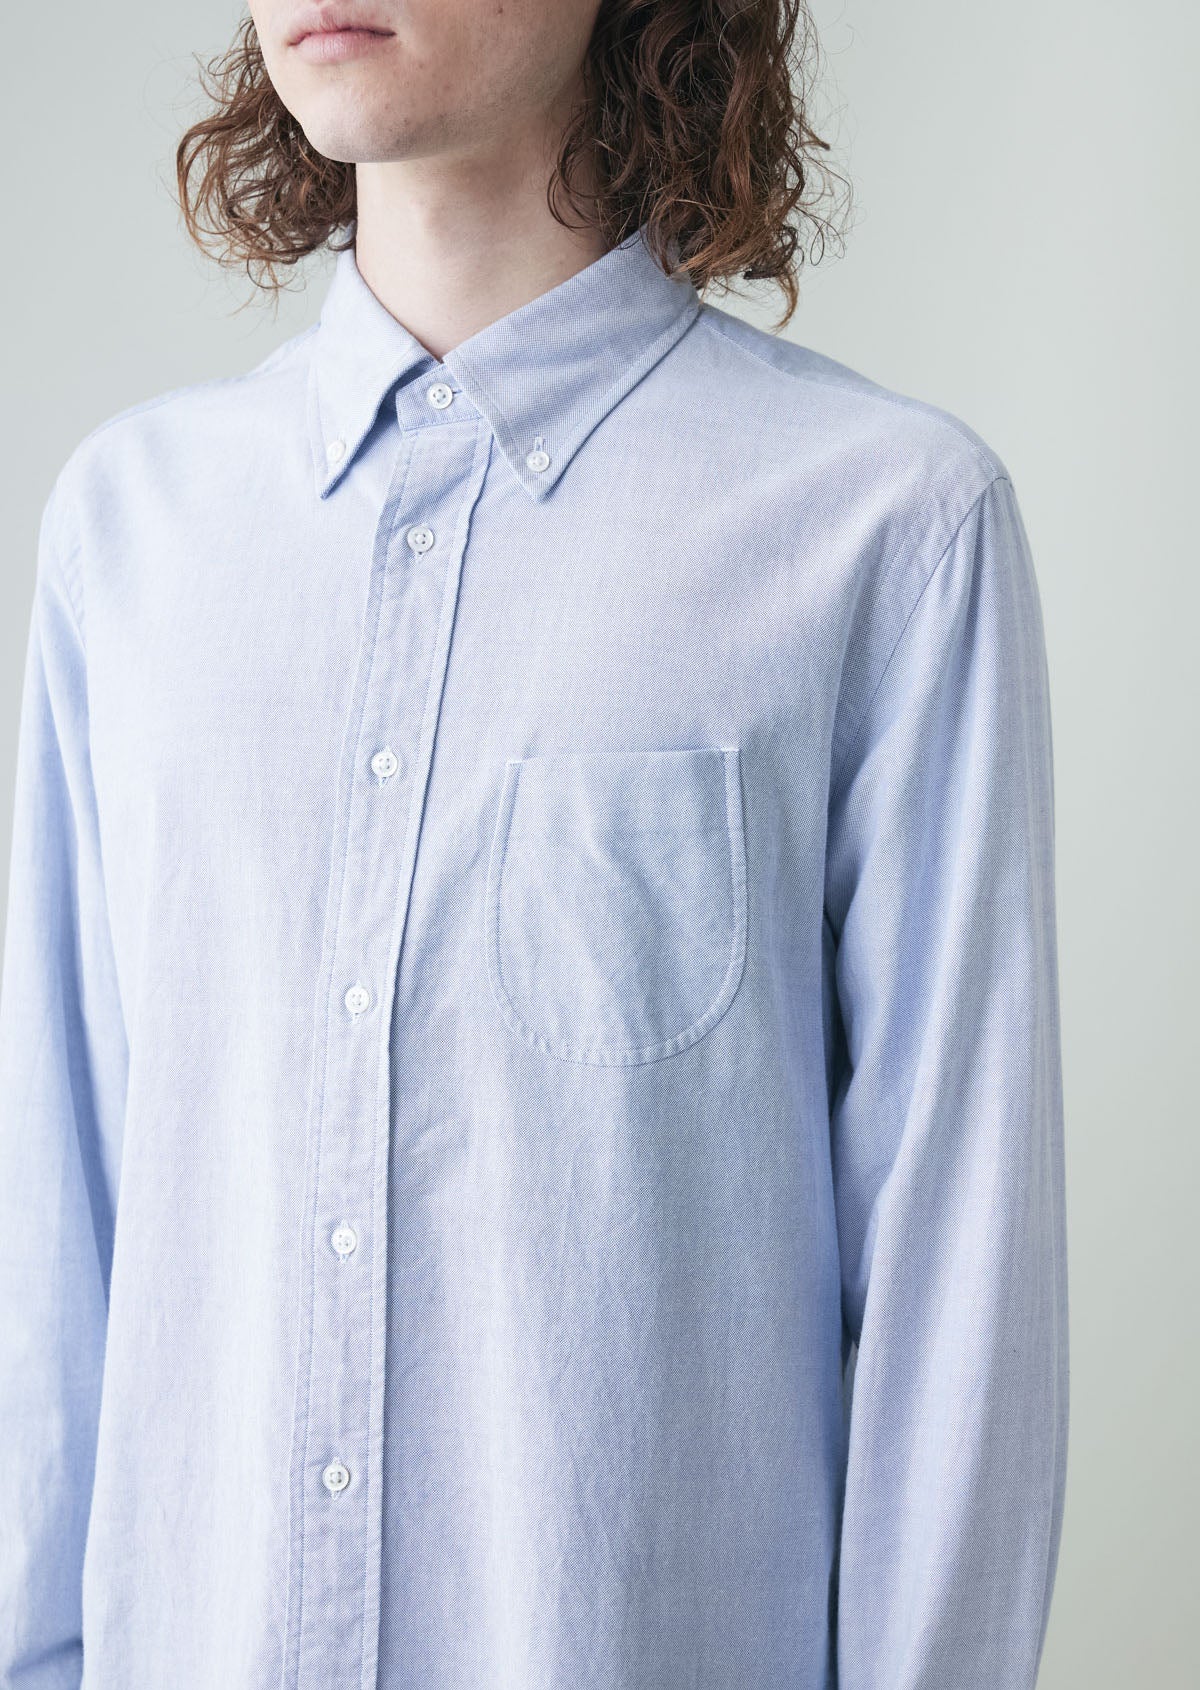 OX FORD BUTTON DOWN SHIRTS BLUE　8061-1101